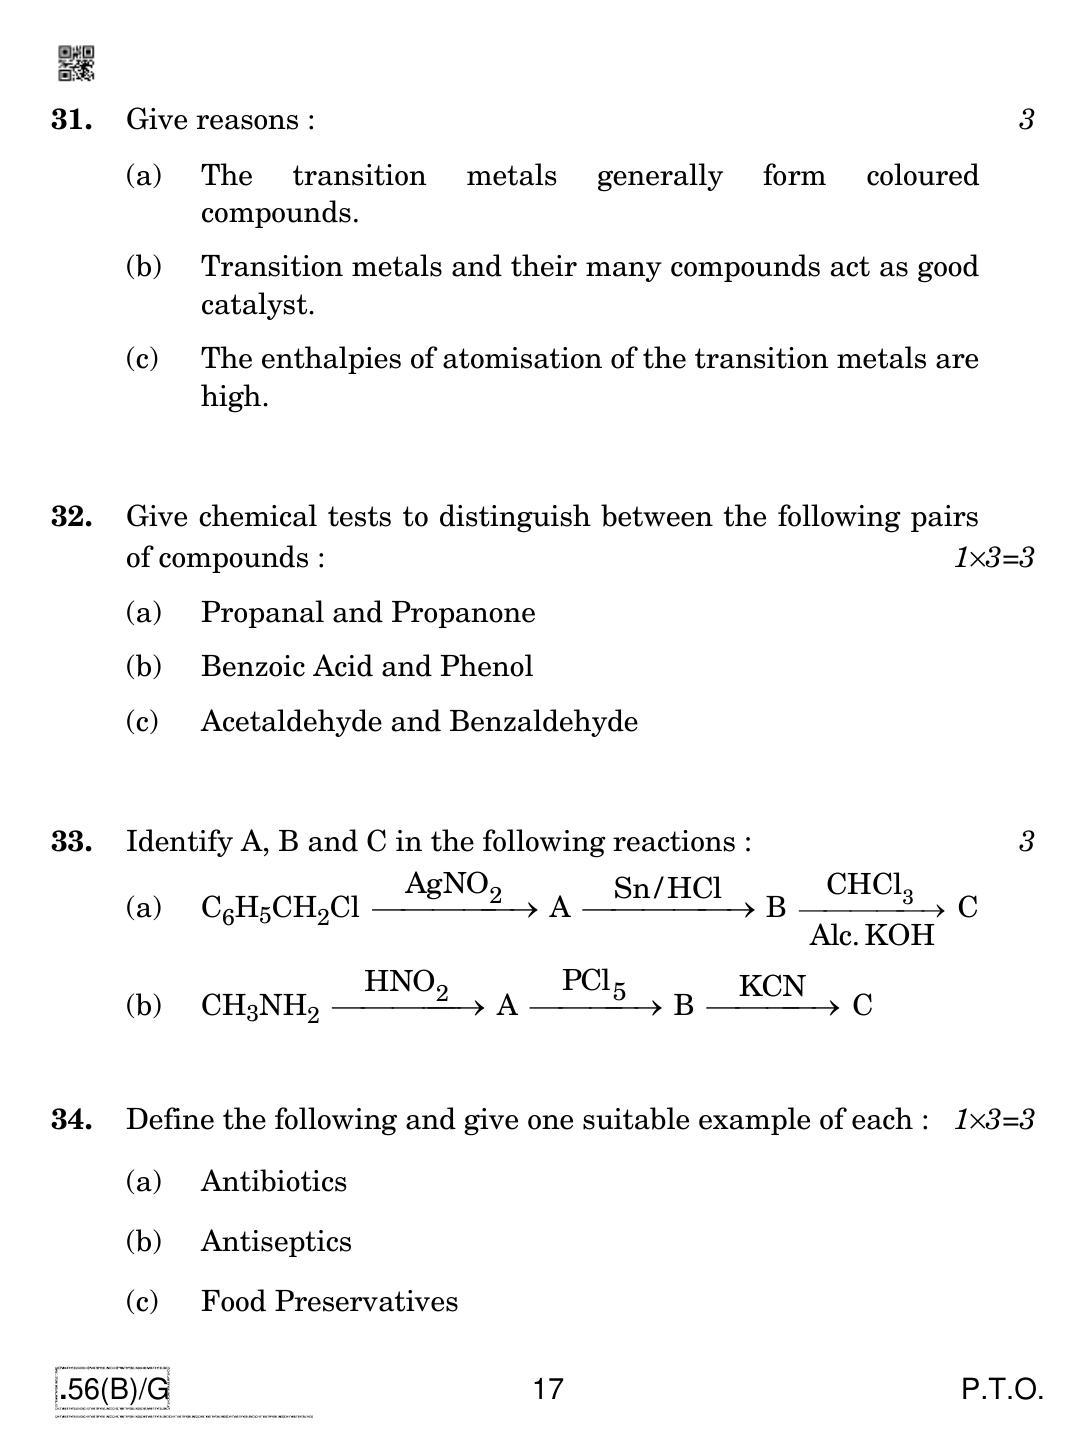 CBSE Class 12 56(B)-C - Chemistry For Blind Candidates 2020 Compartment Question Paper - Page 17